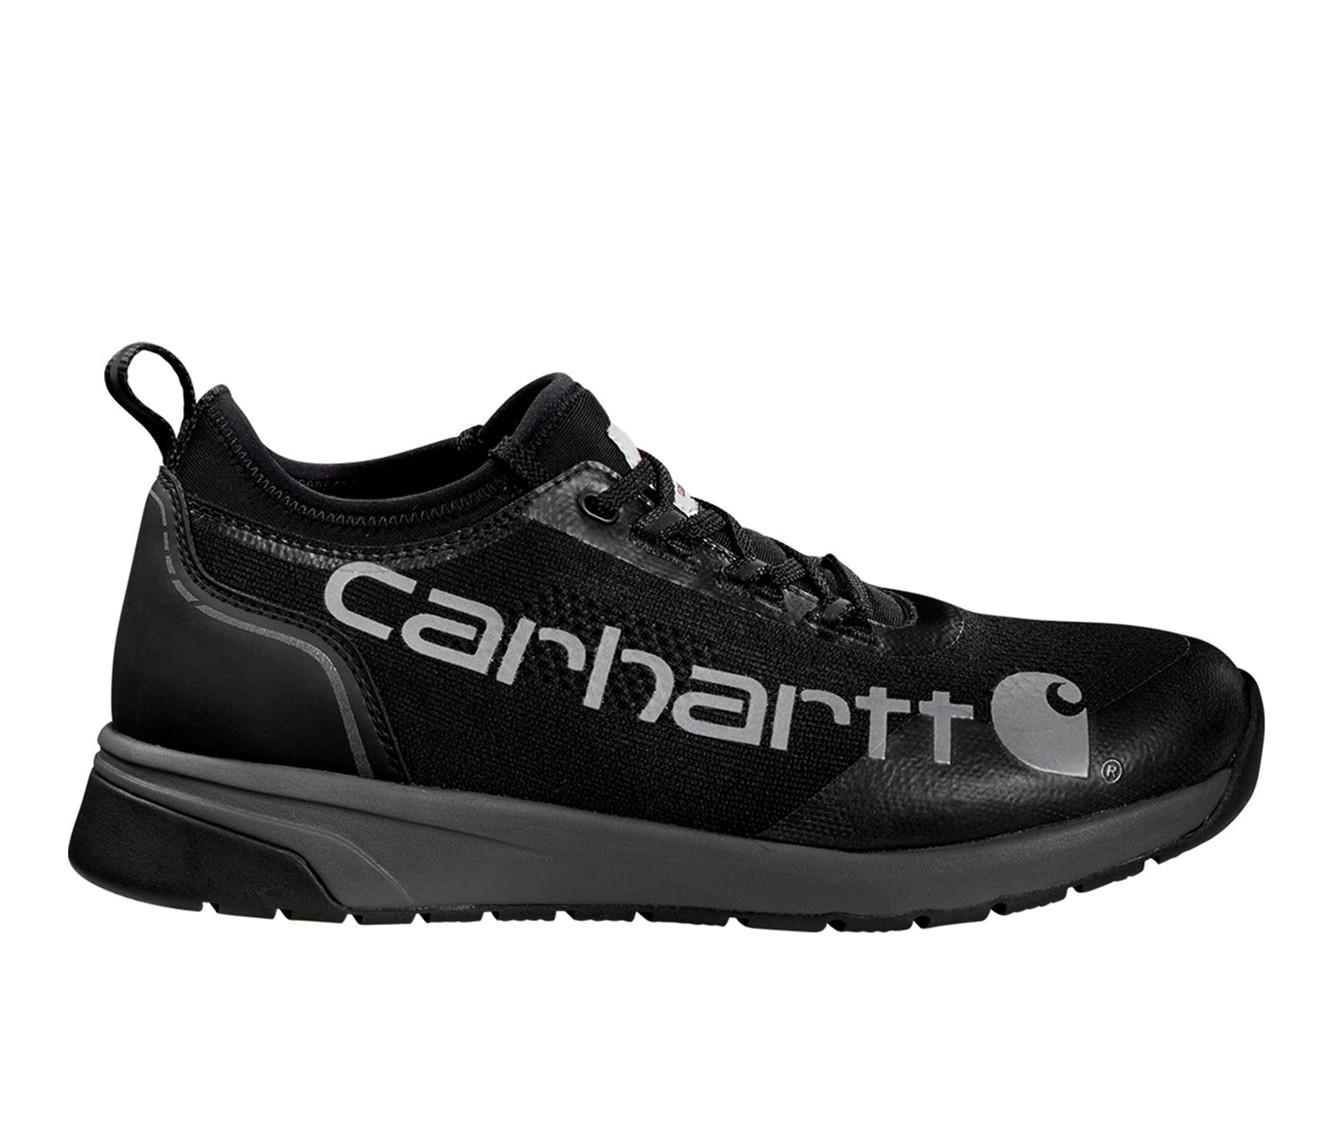 Men's Carhartt FA3001 Men's Force 3" SD Soft Toe Safety Shoes